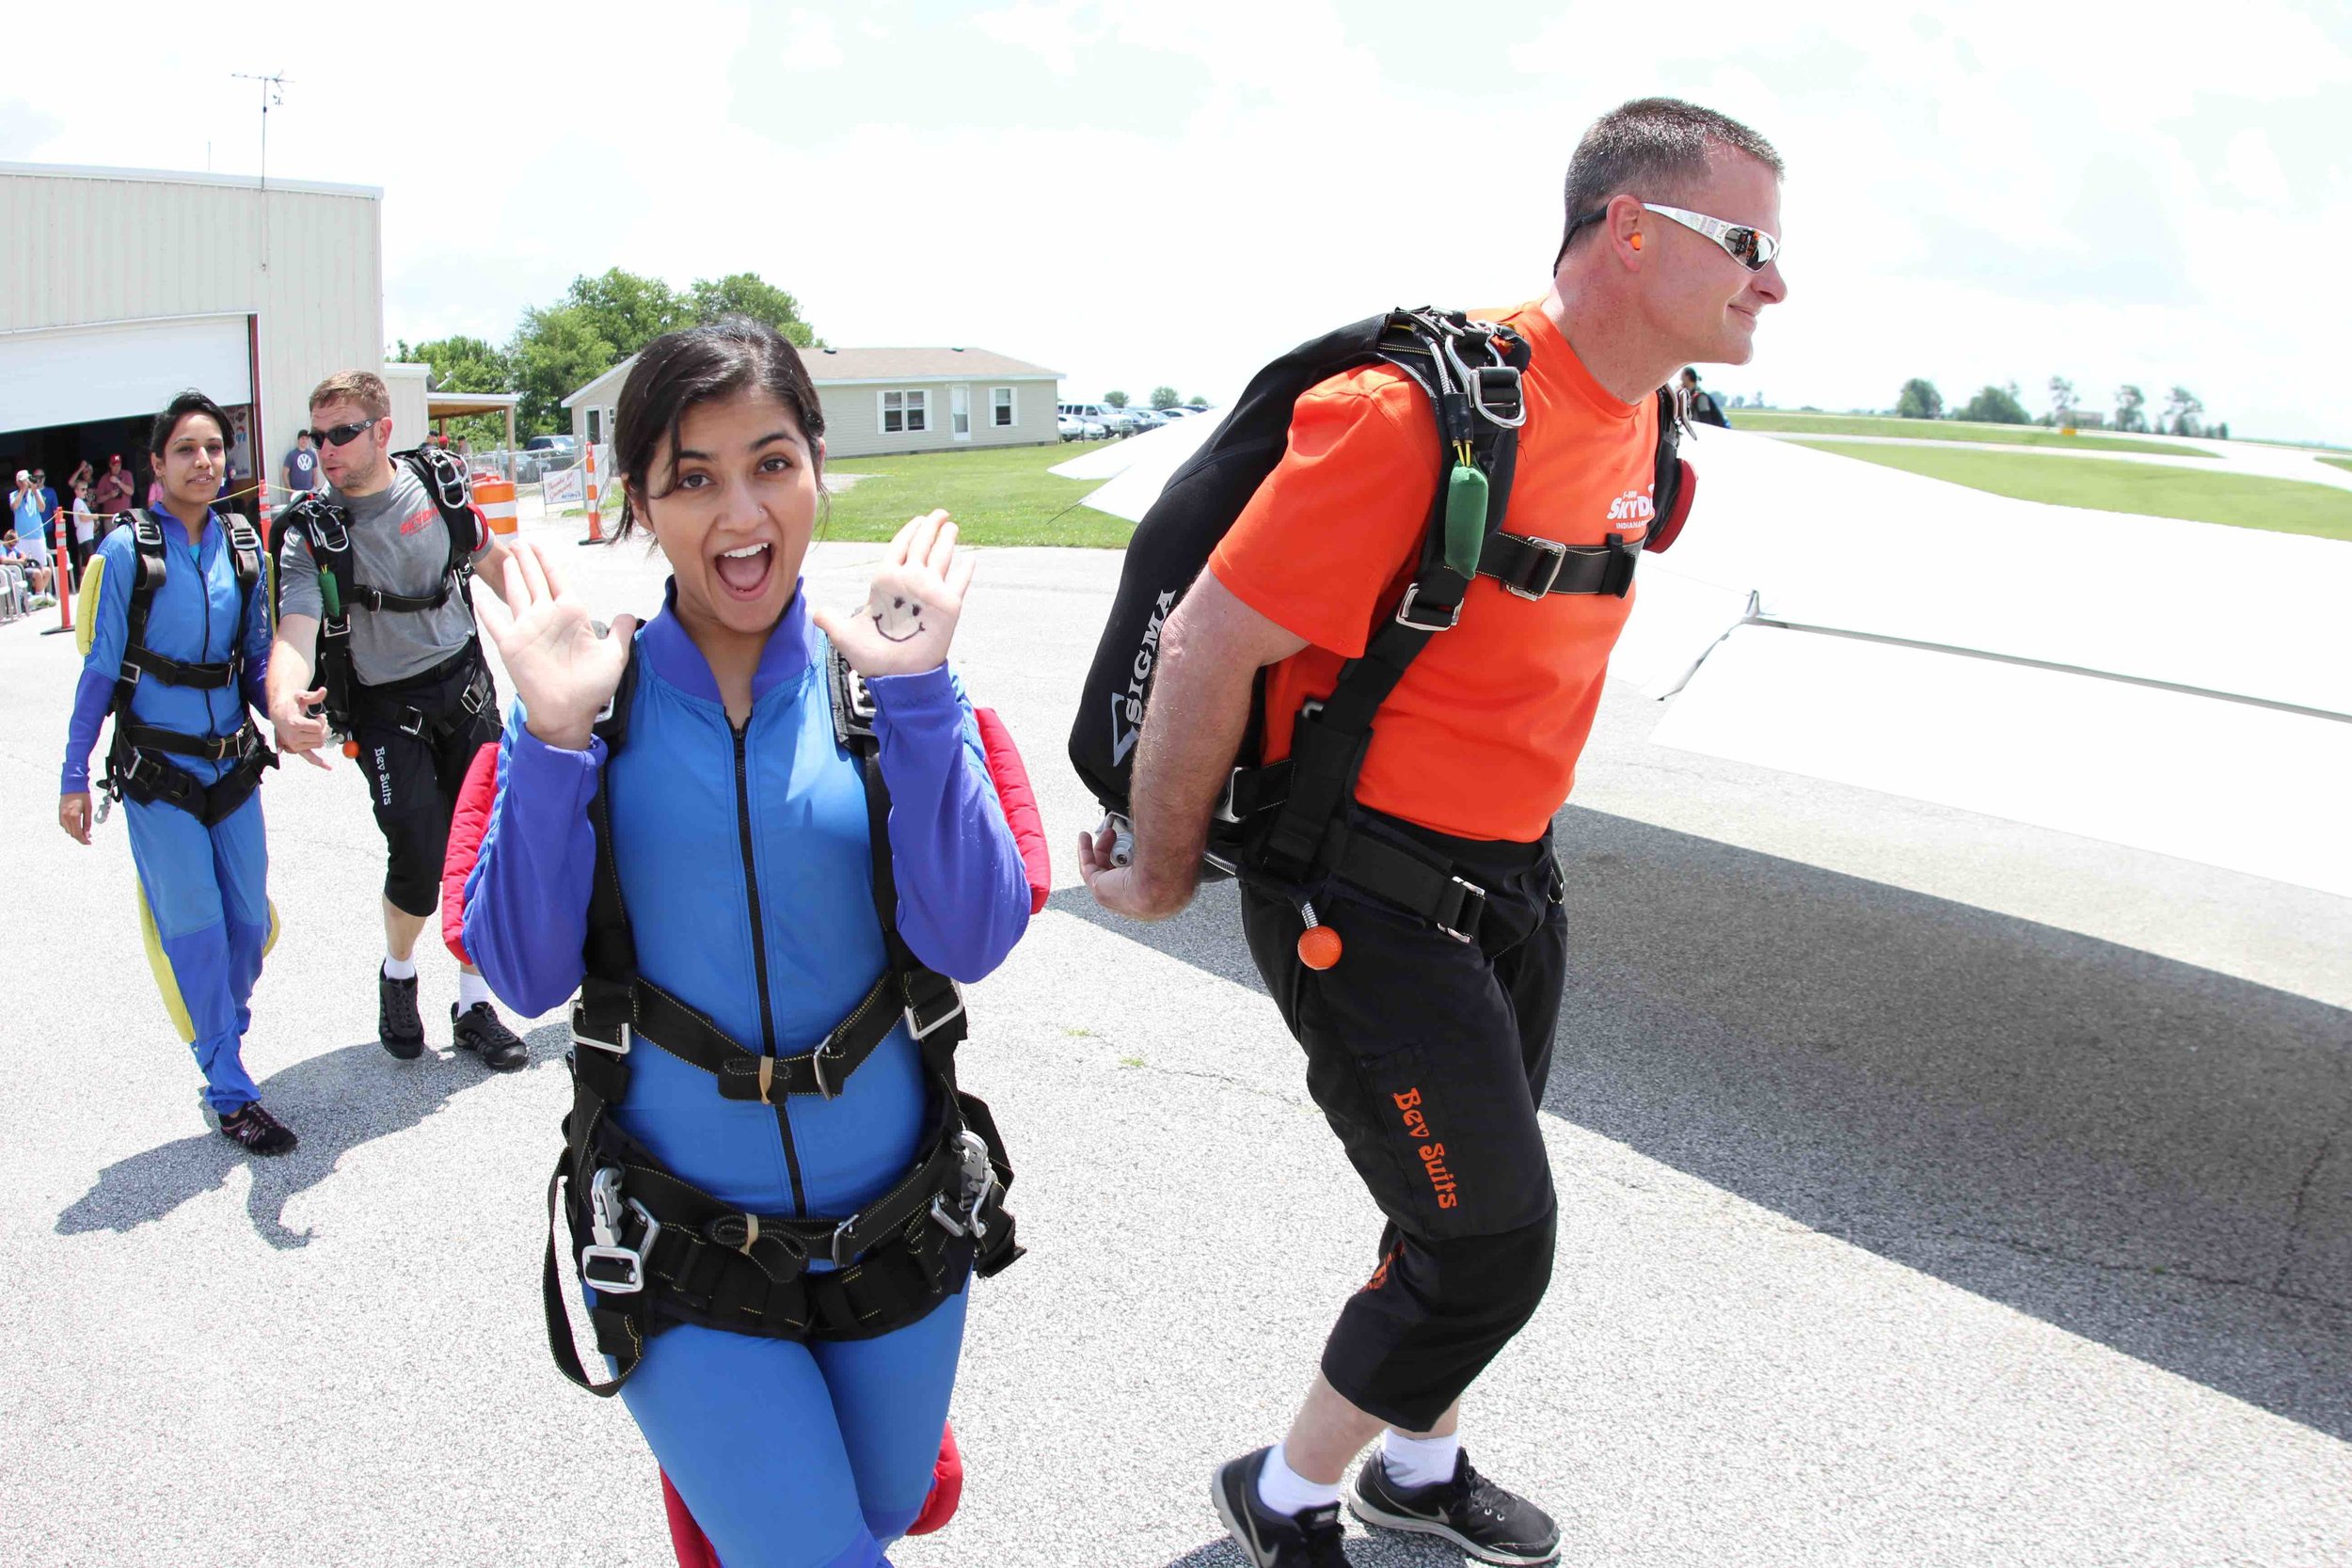 How do you feel about skydiving? (Copy)